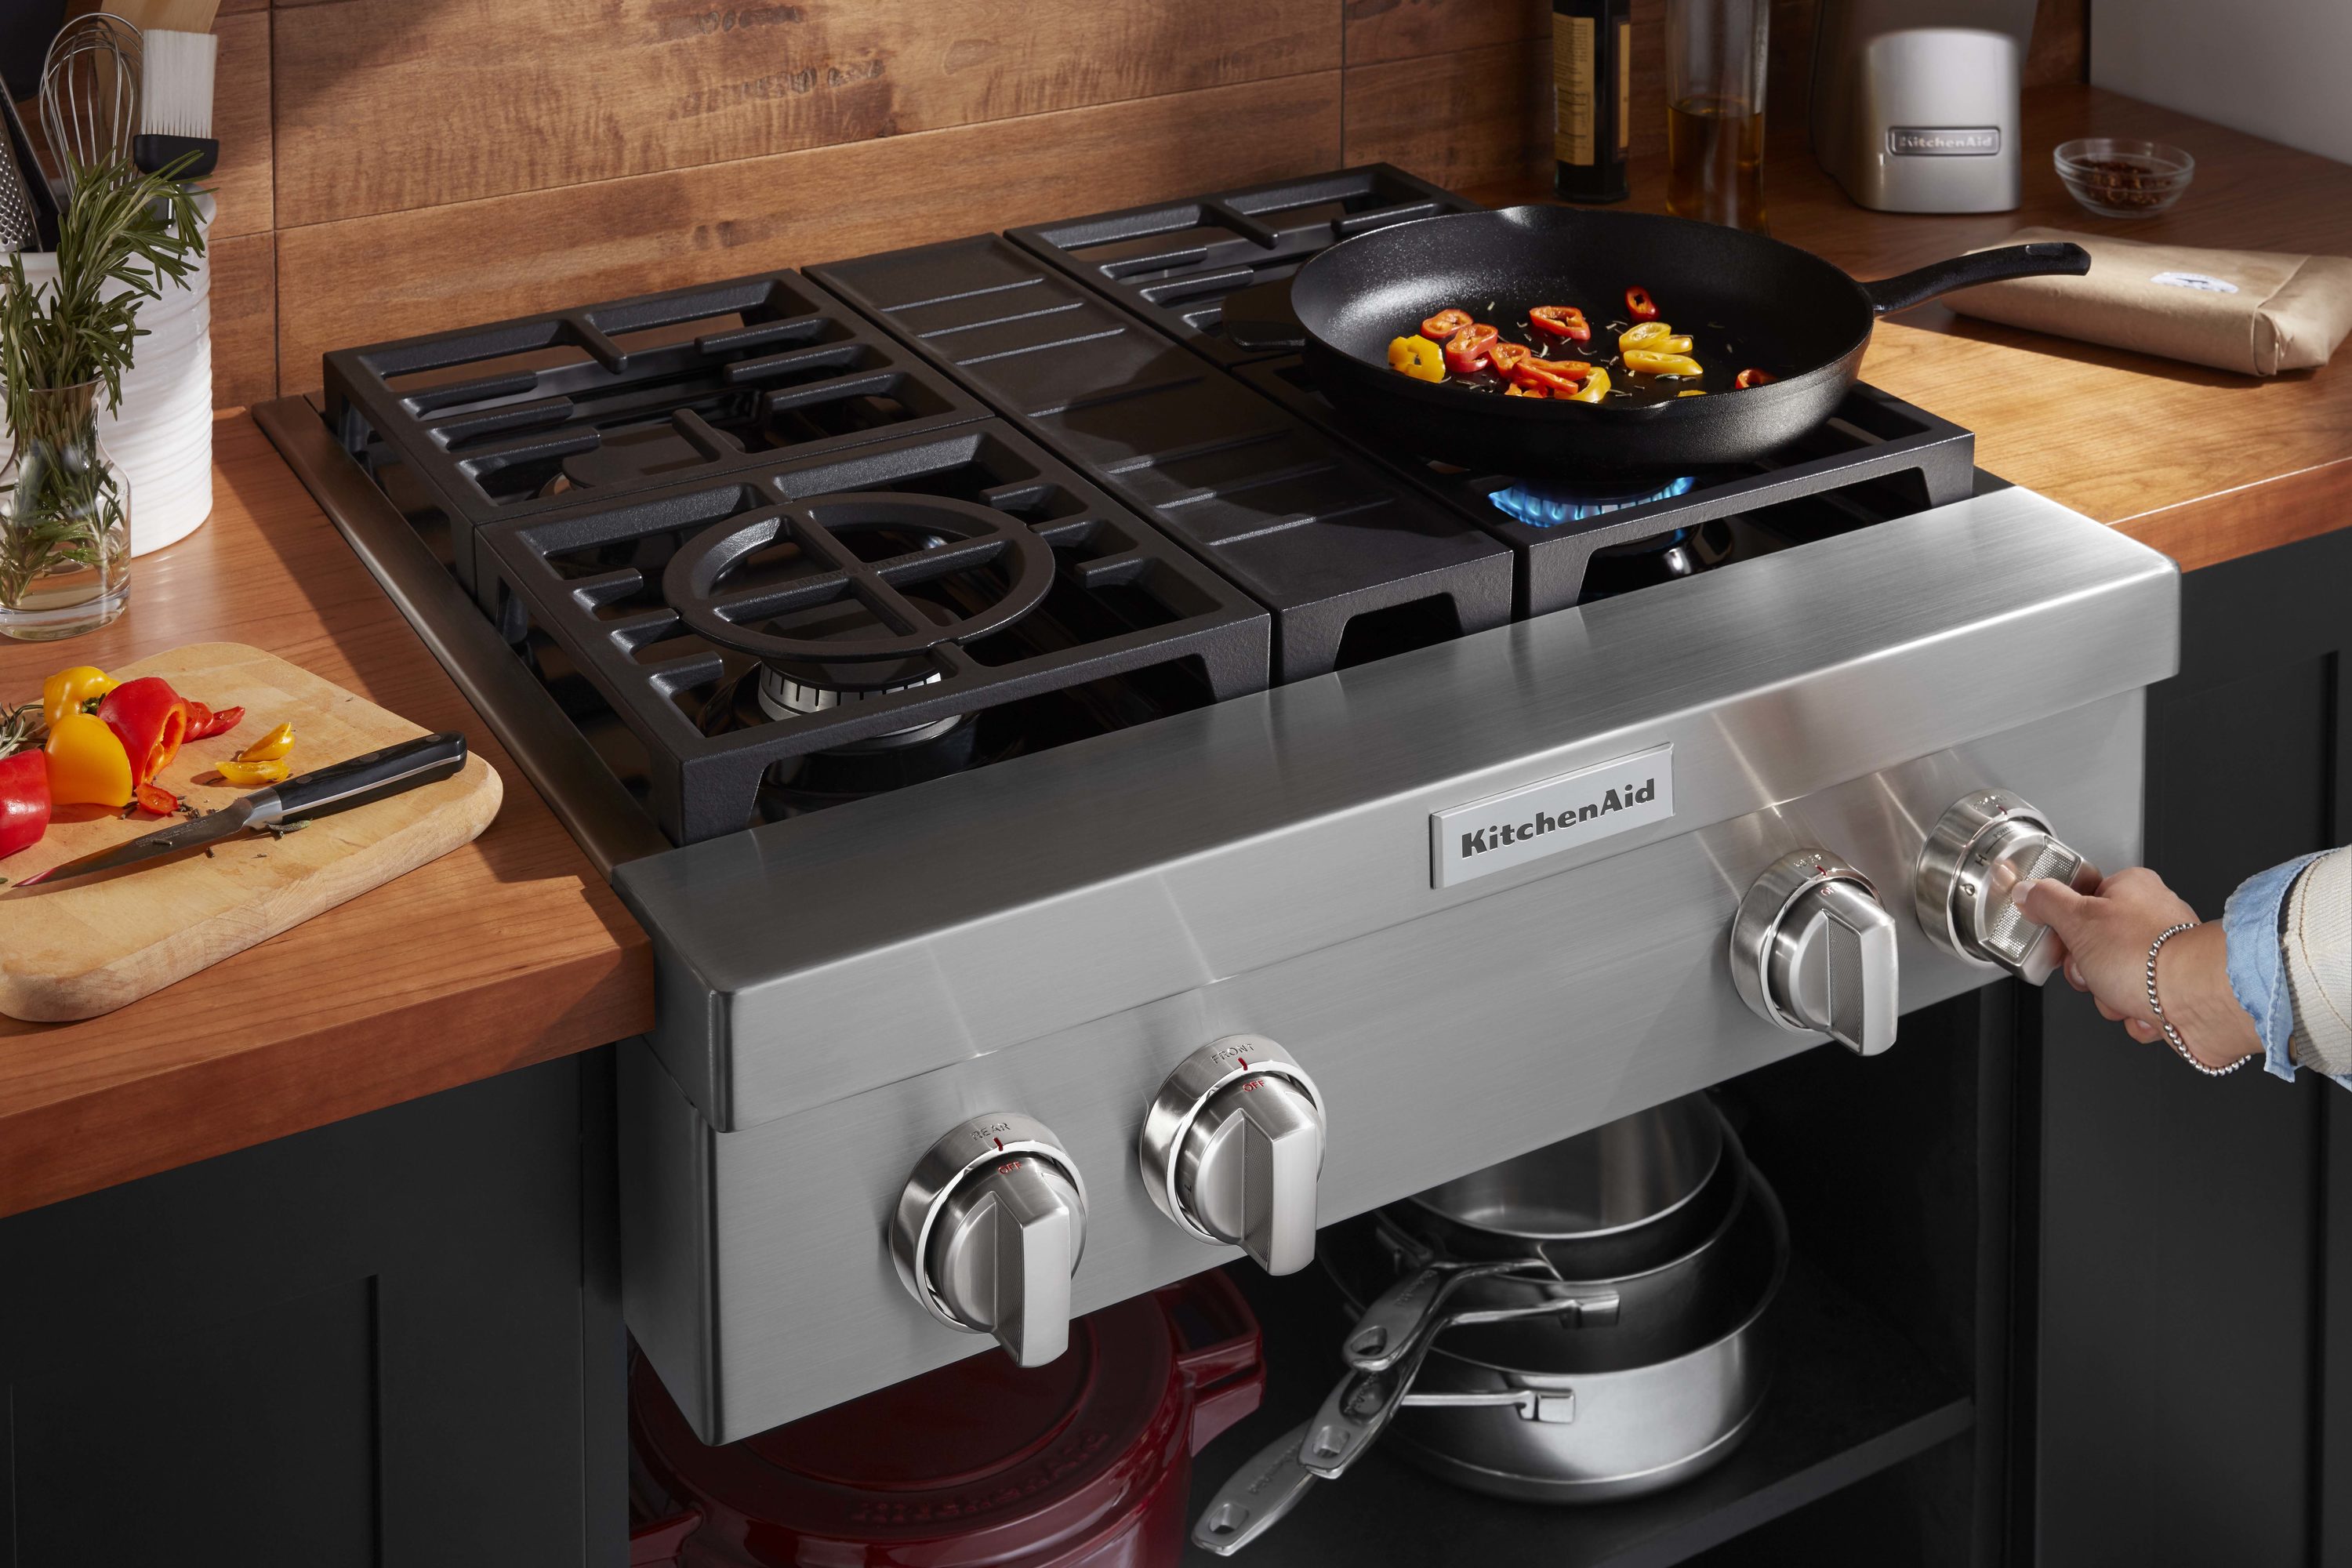 KitchenAid 30-inch Built-in Gas Cooktop with Griddle KCGS950ESS